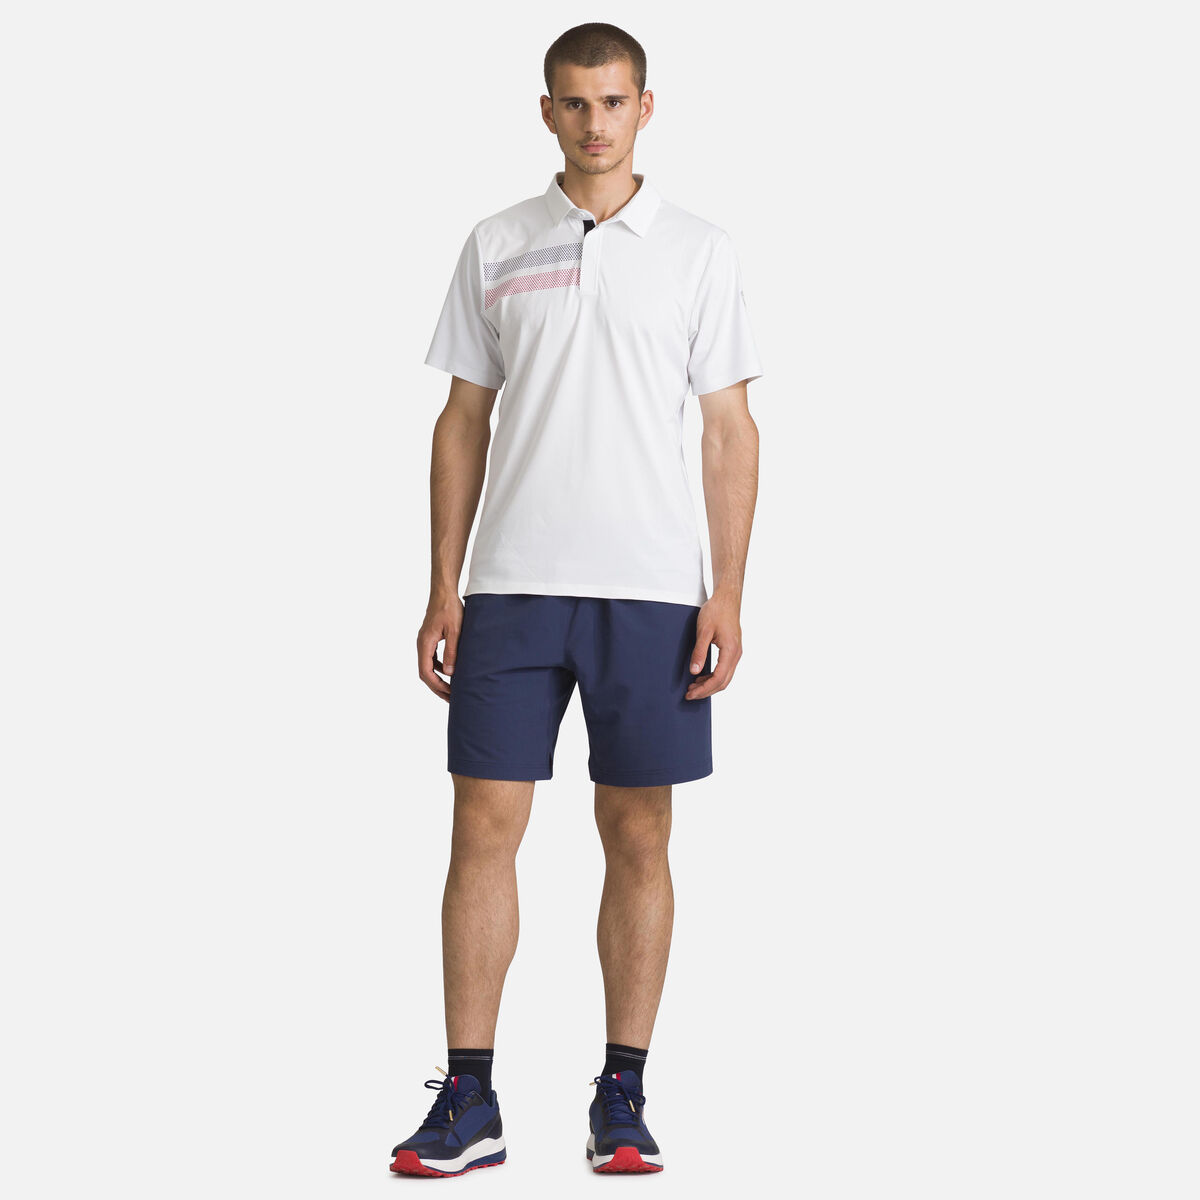 Rossignol Men's lightweight breathable polo shirt white